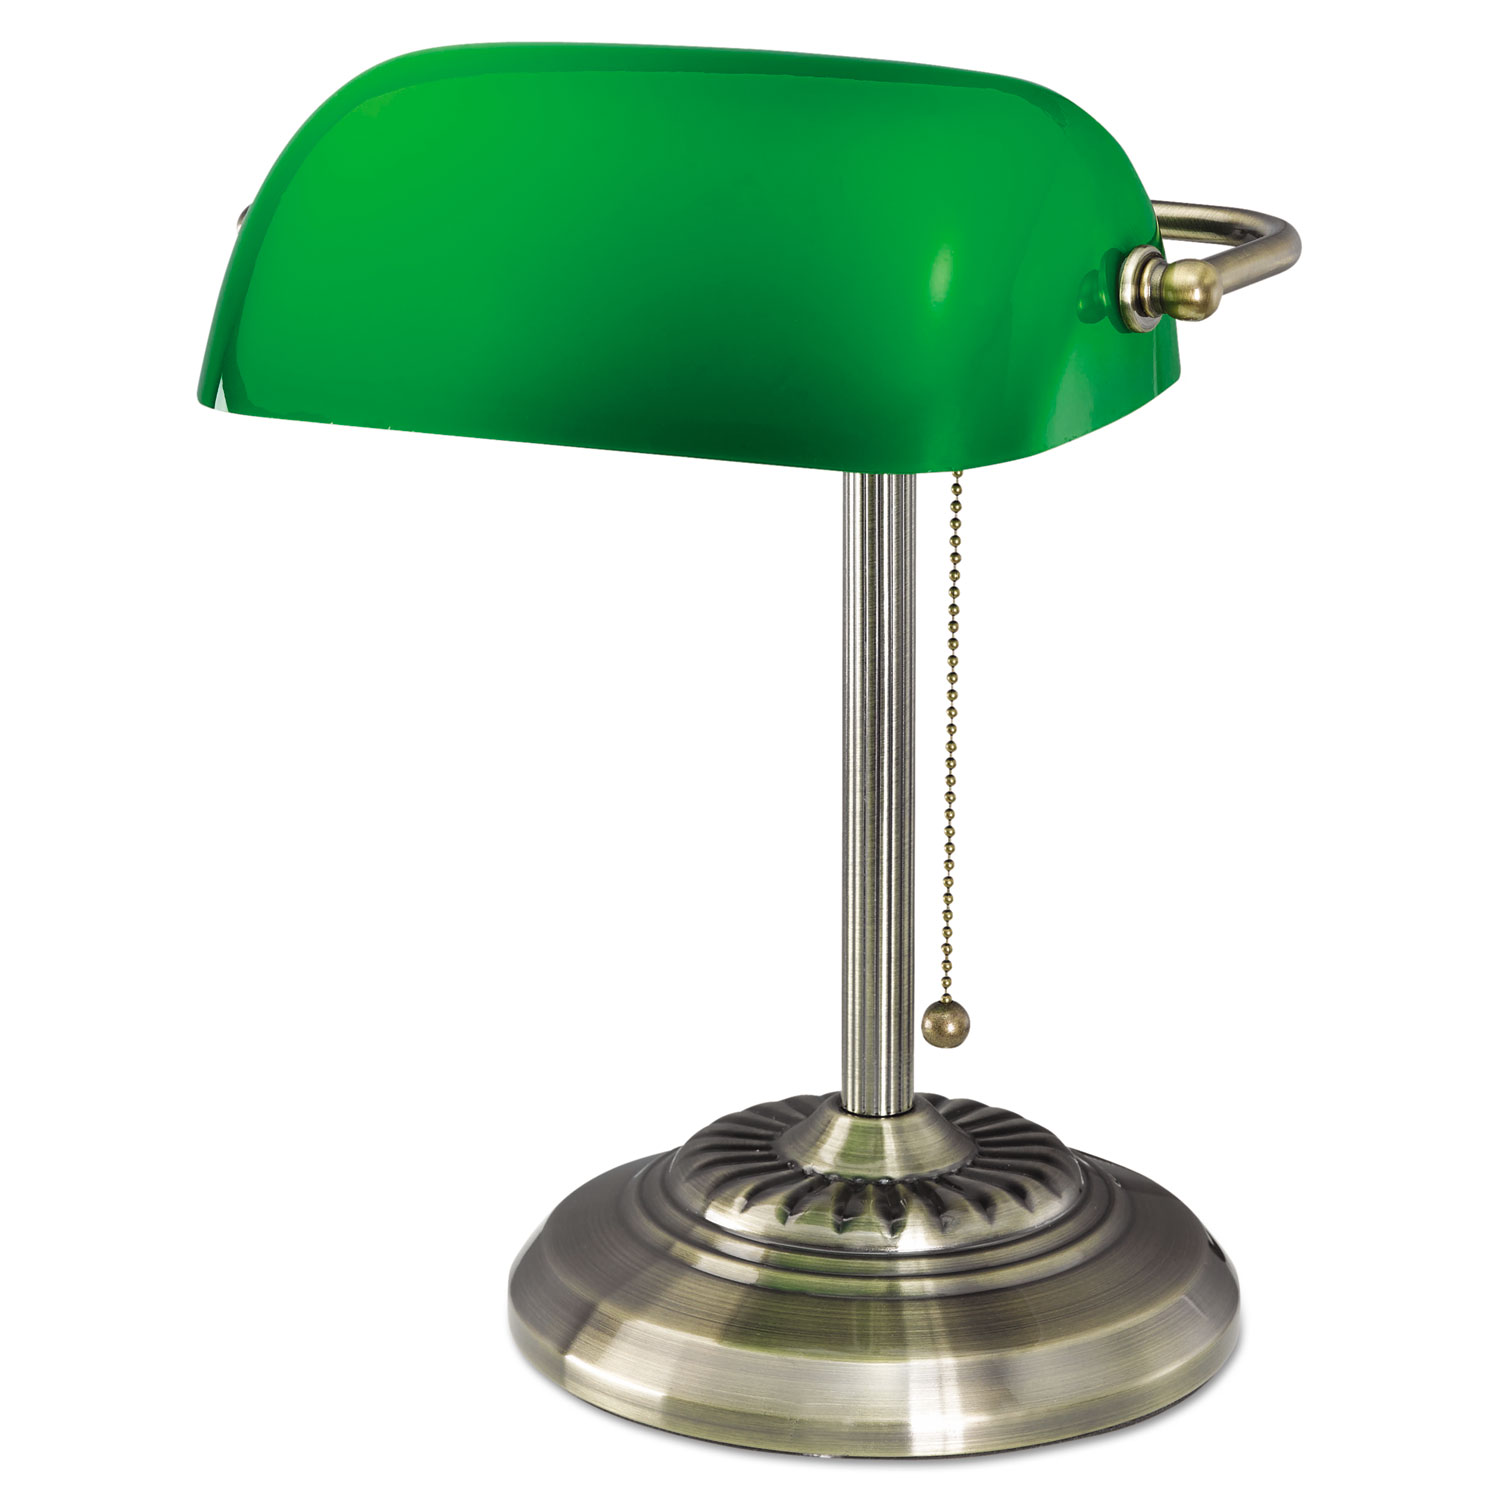  Alera ALELMP557AB Traditional Banker's Lamp, Green Glass Shade, 10.5w x 11d x 13h, Antique Brass (ALELMP557AB) 